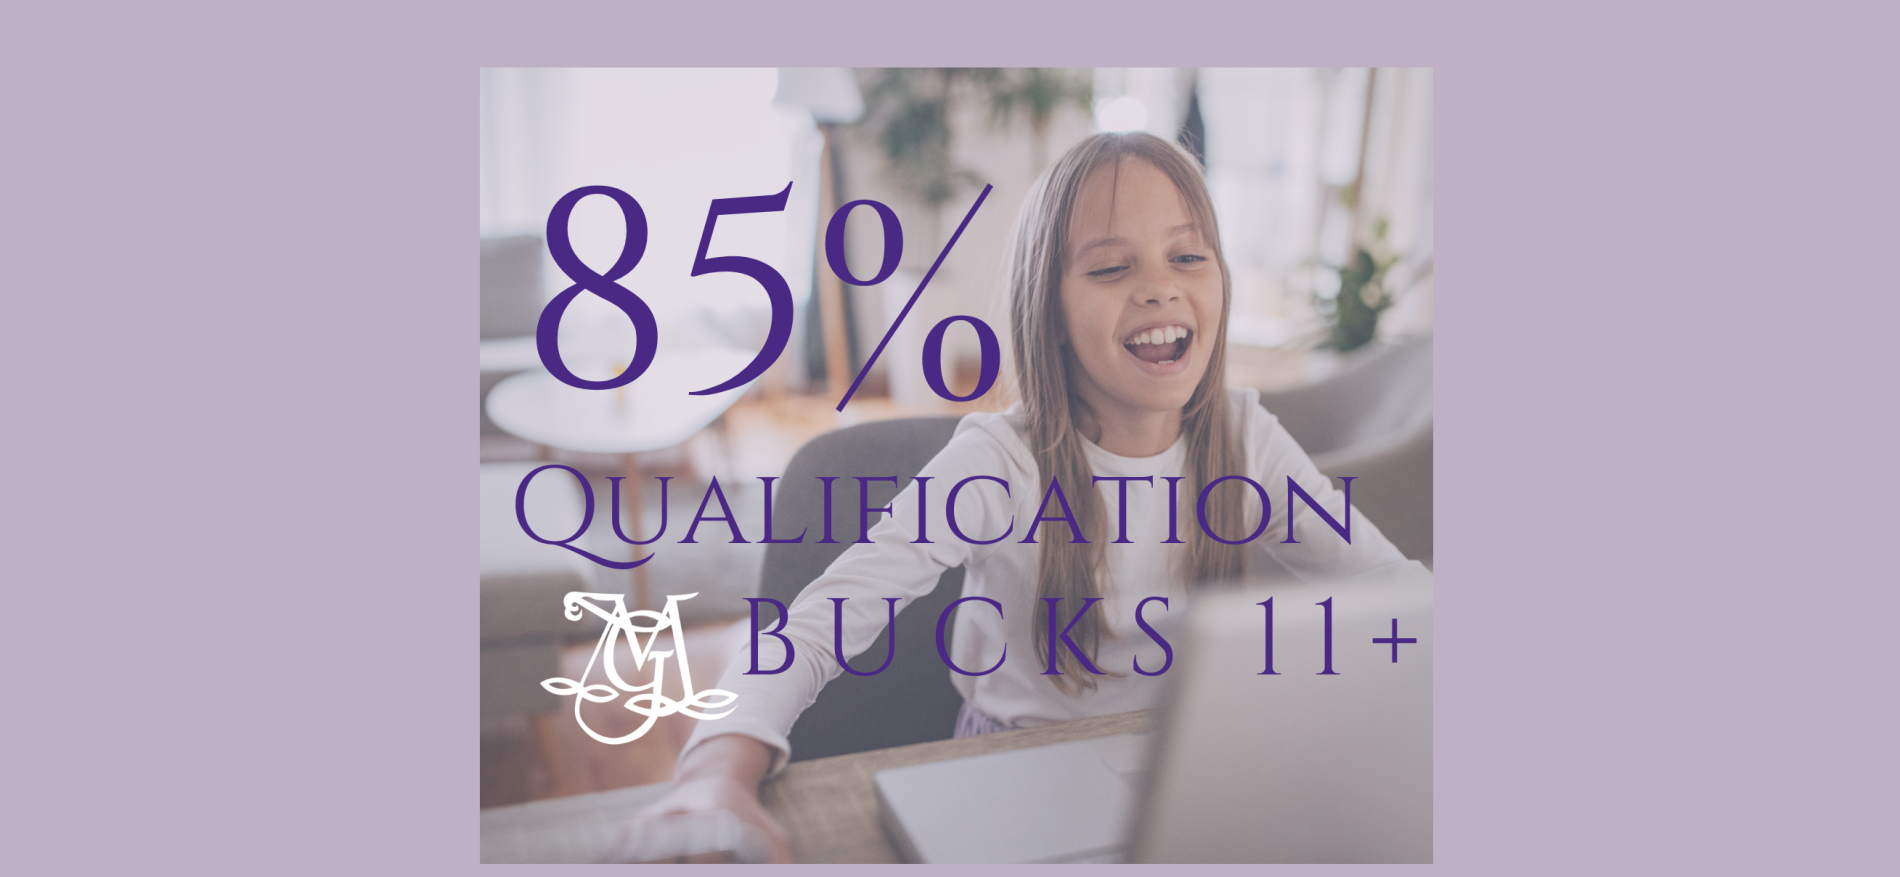 The currently qualification rate of 85%